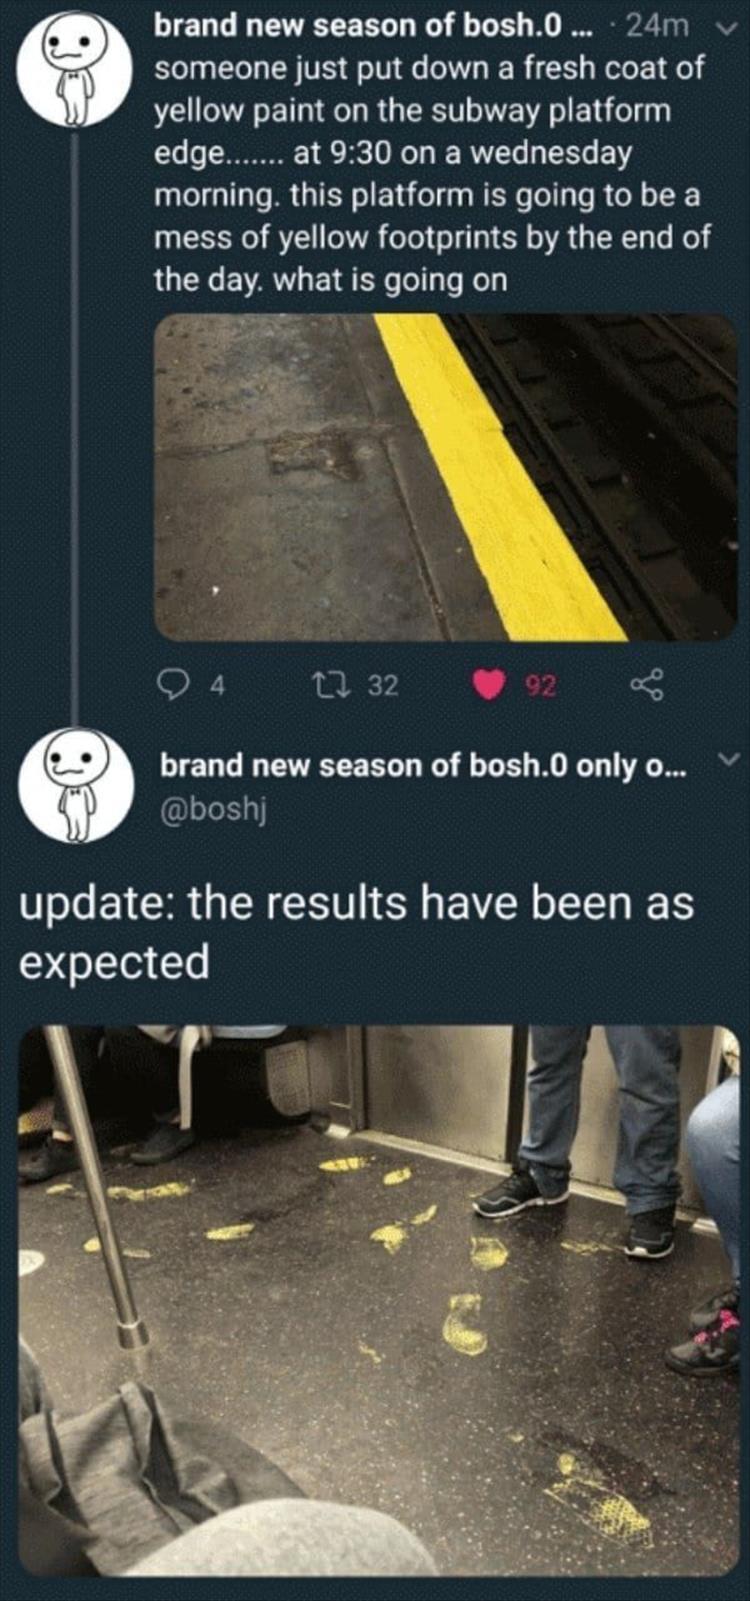 poster - brand new season of bosh.o ... 24m someone just put down a fresh coat of yellow paint on the subway platform edge....... at on a wednesday morning. this platform is going to be a mess of yellow footprints by the end of the day. what is going on 2